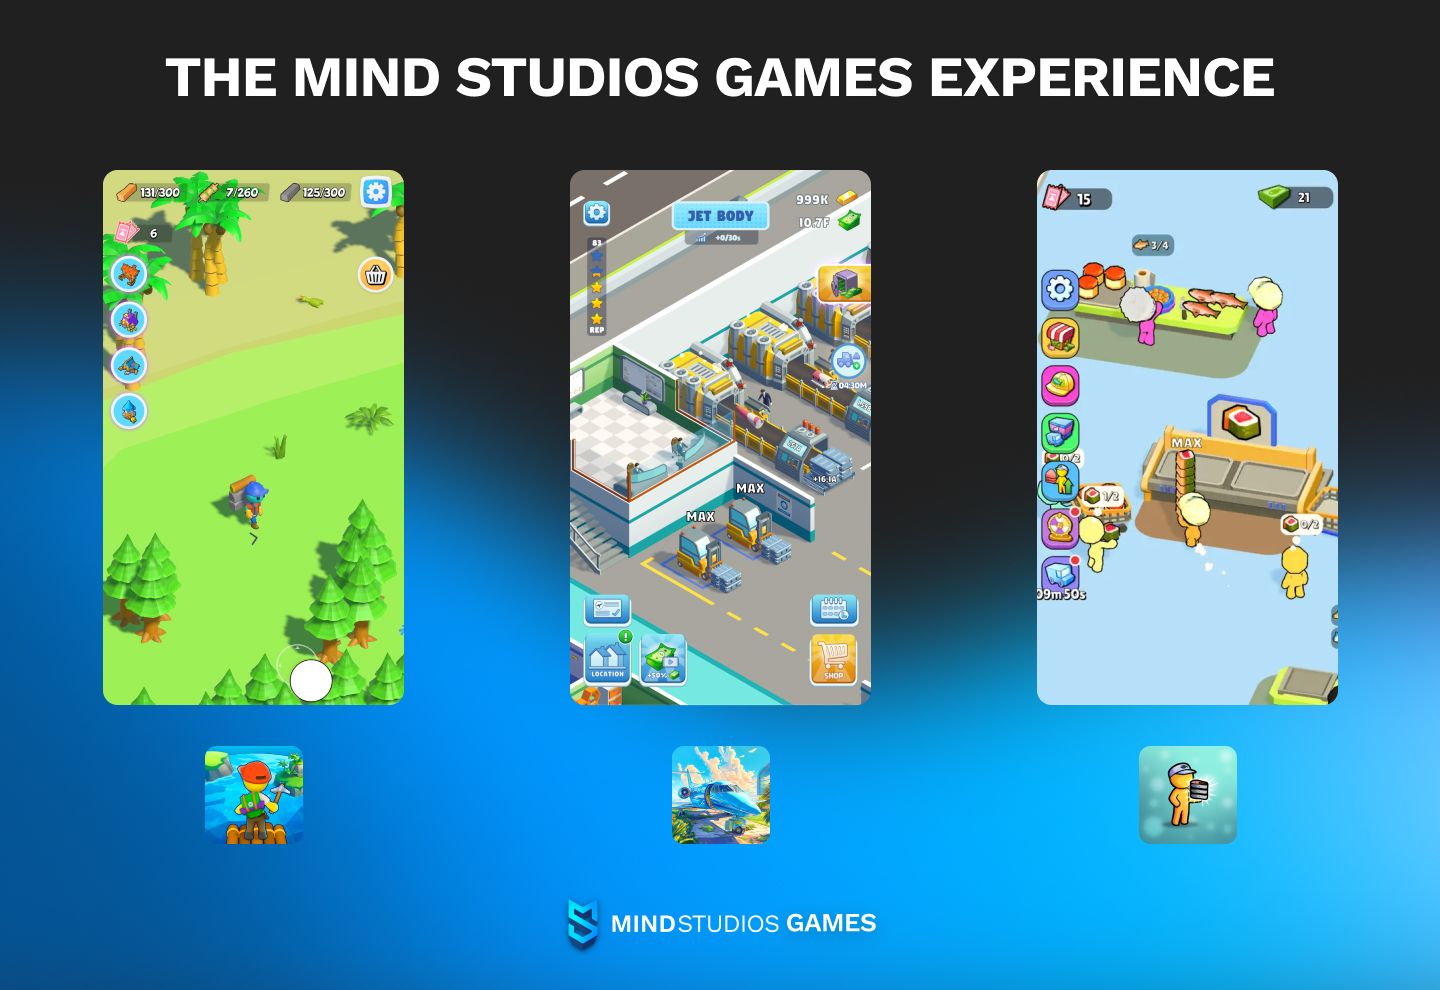 The Mind Studios Games experience